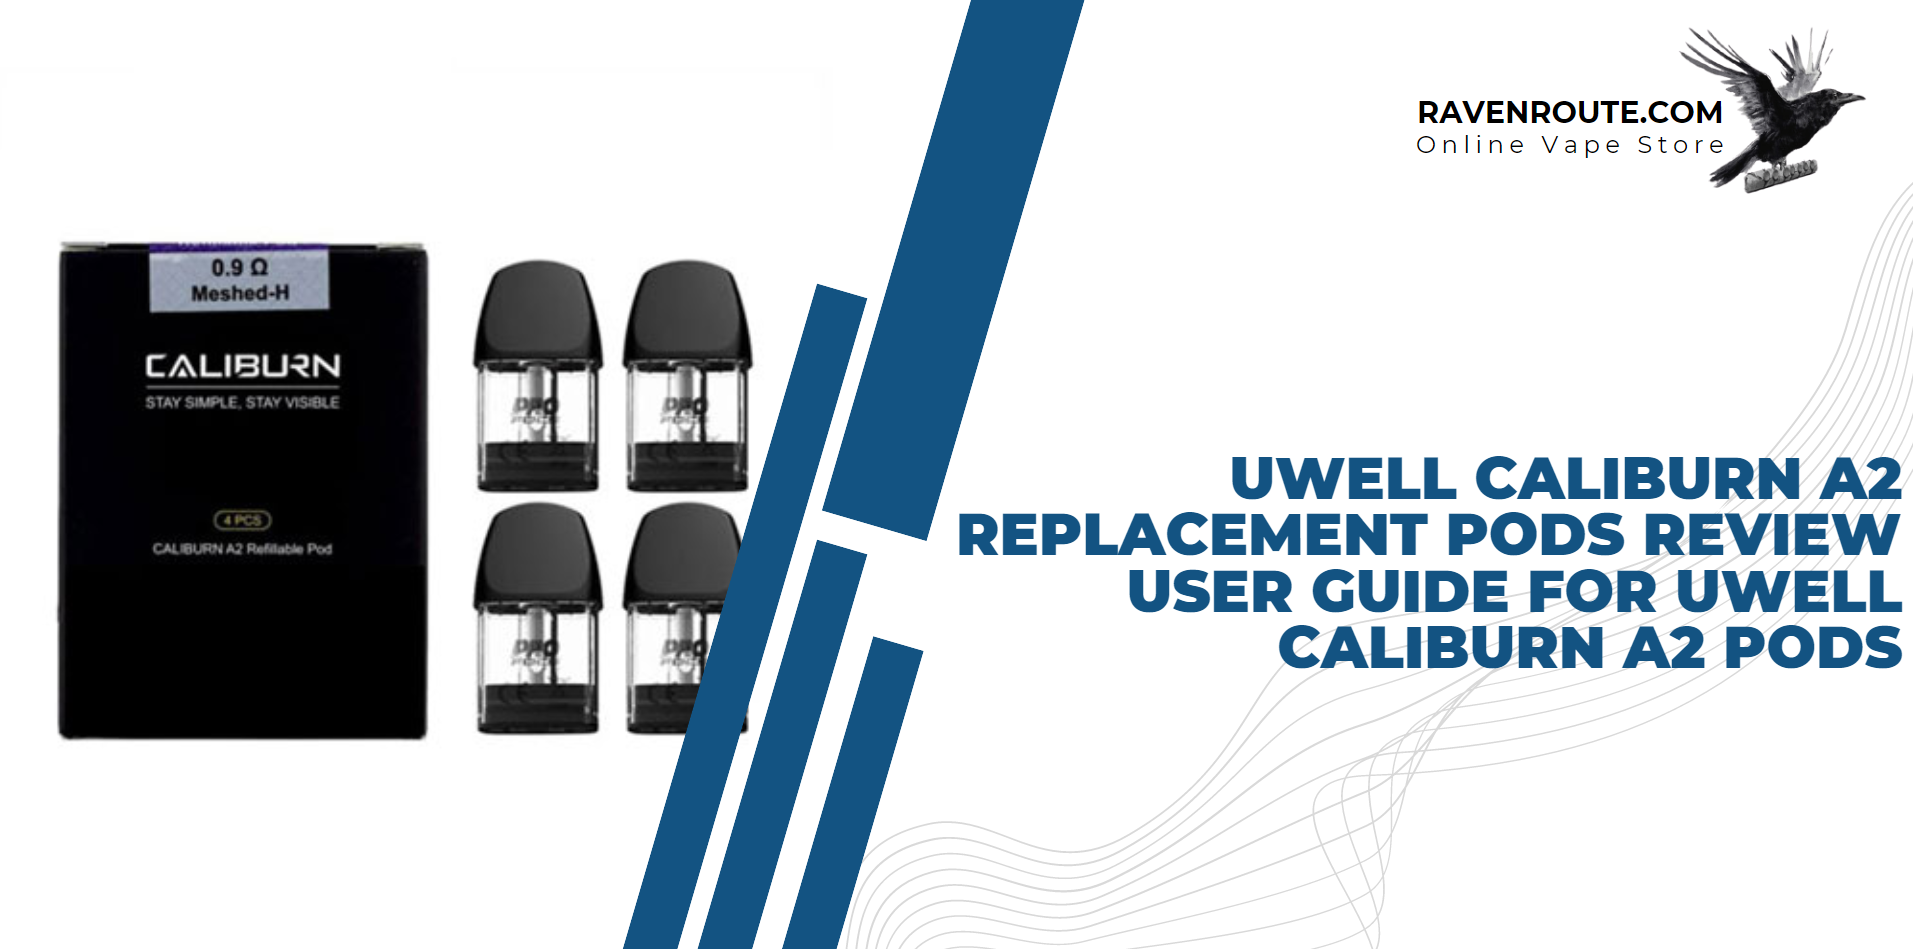 Uwell Caliburn A2 Replacement Pods Review - User Guide for Uwell Caliburn A2 Pods